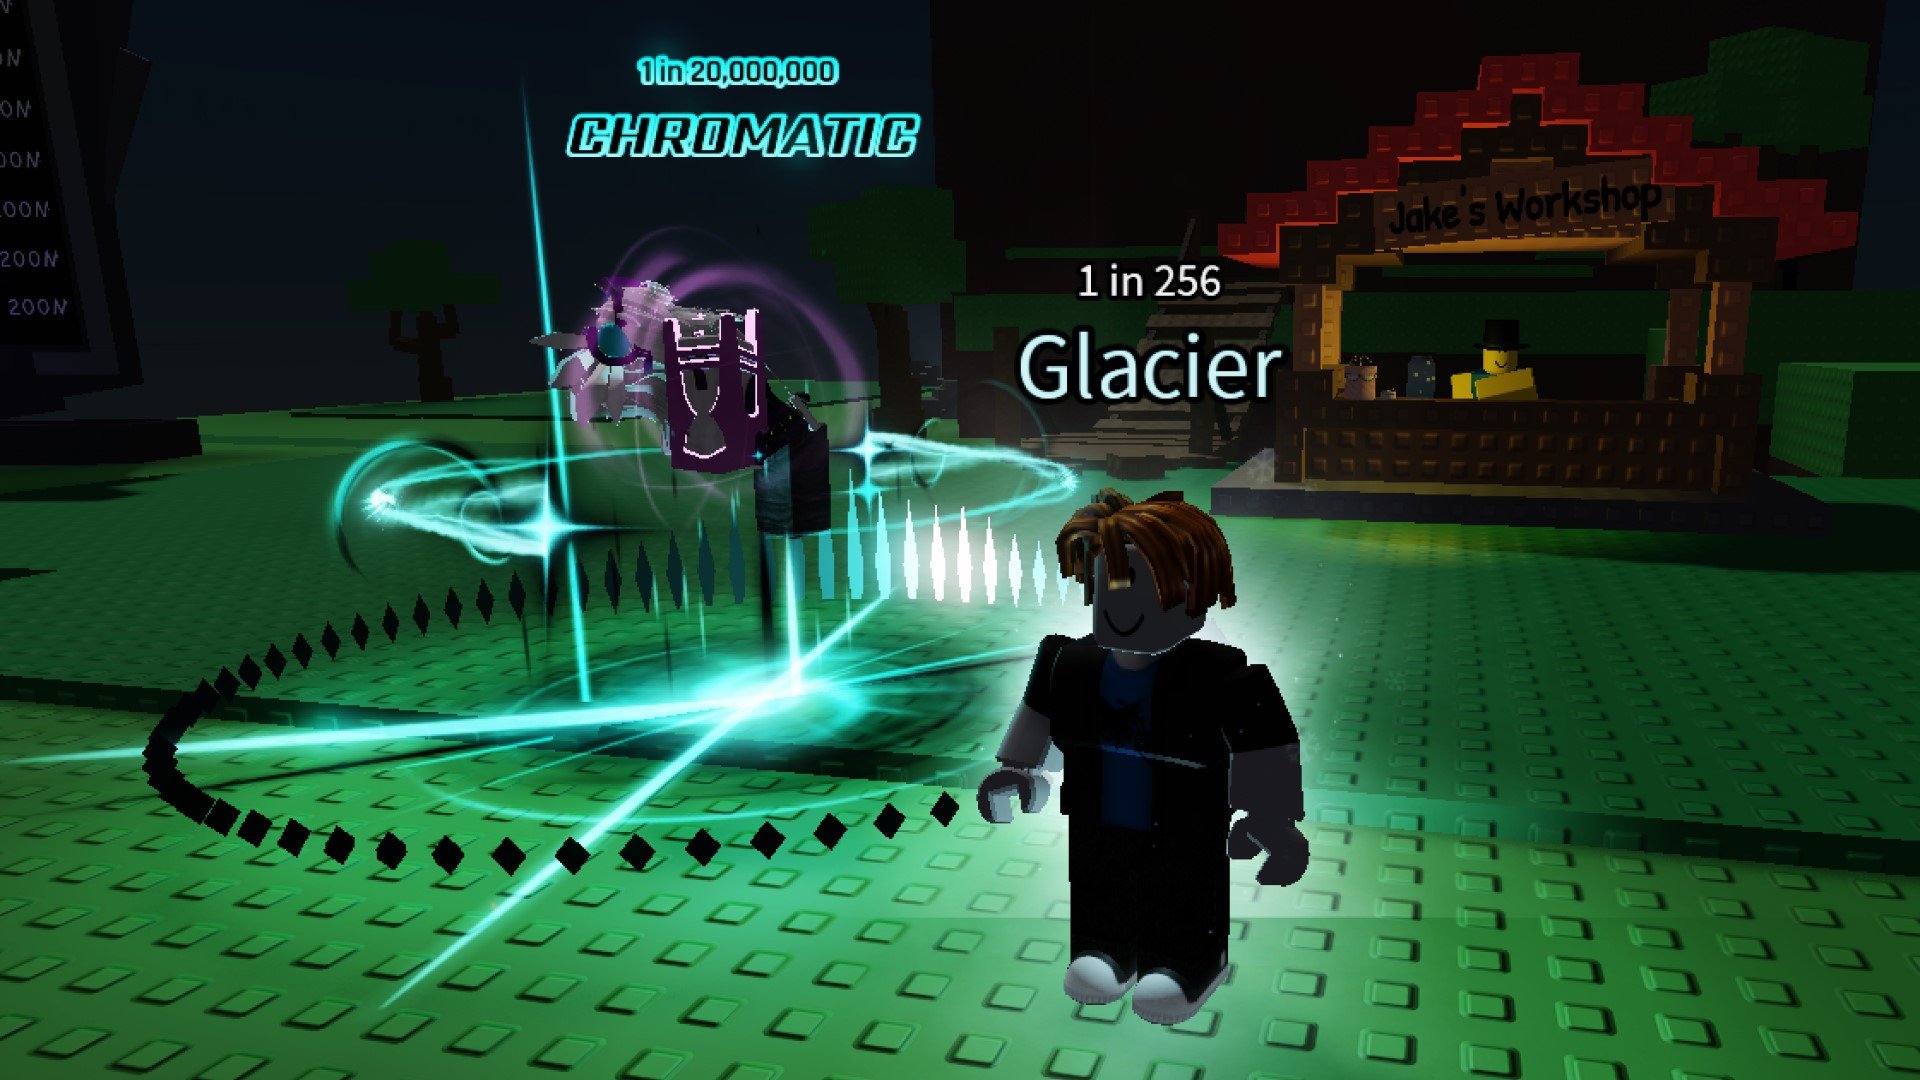 Two characters from Roblox game Sols RNG. The one on the left has the rare Chromatic Aura, while the one on the right has Glacier. It's dark, and a wooden stall is visible in the background.